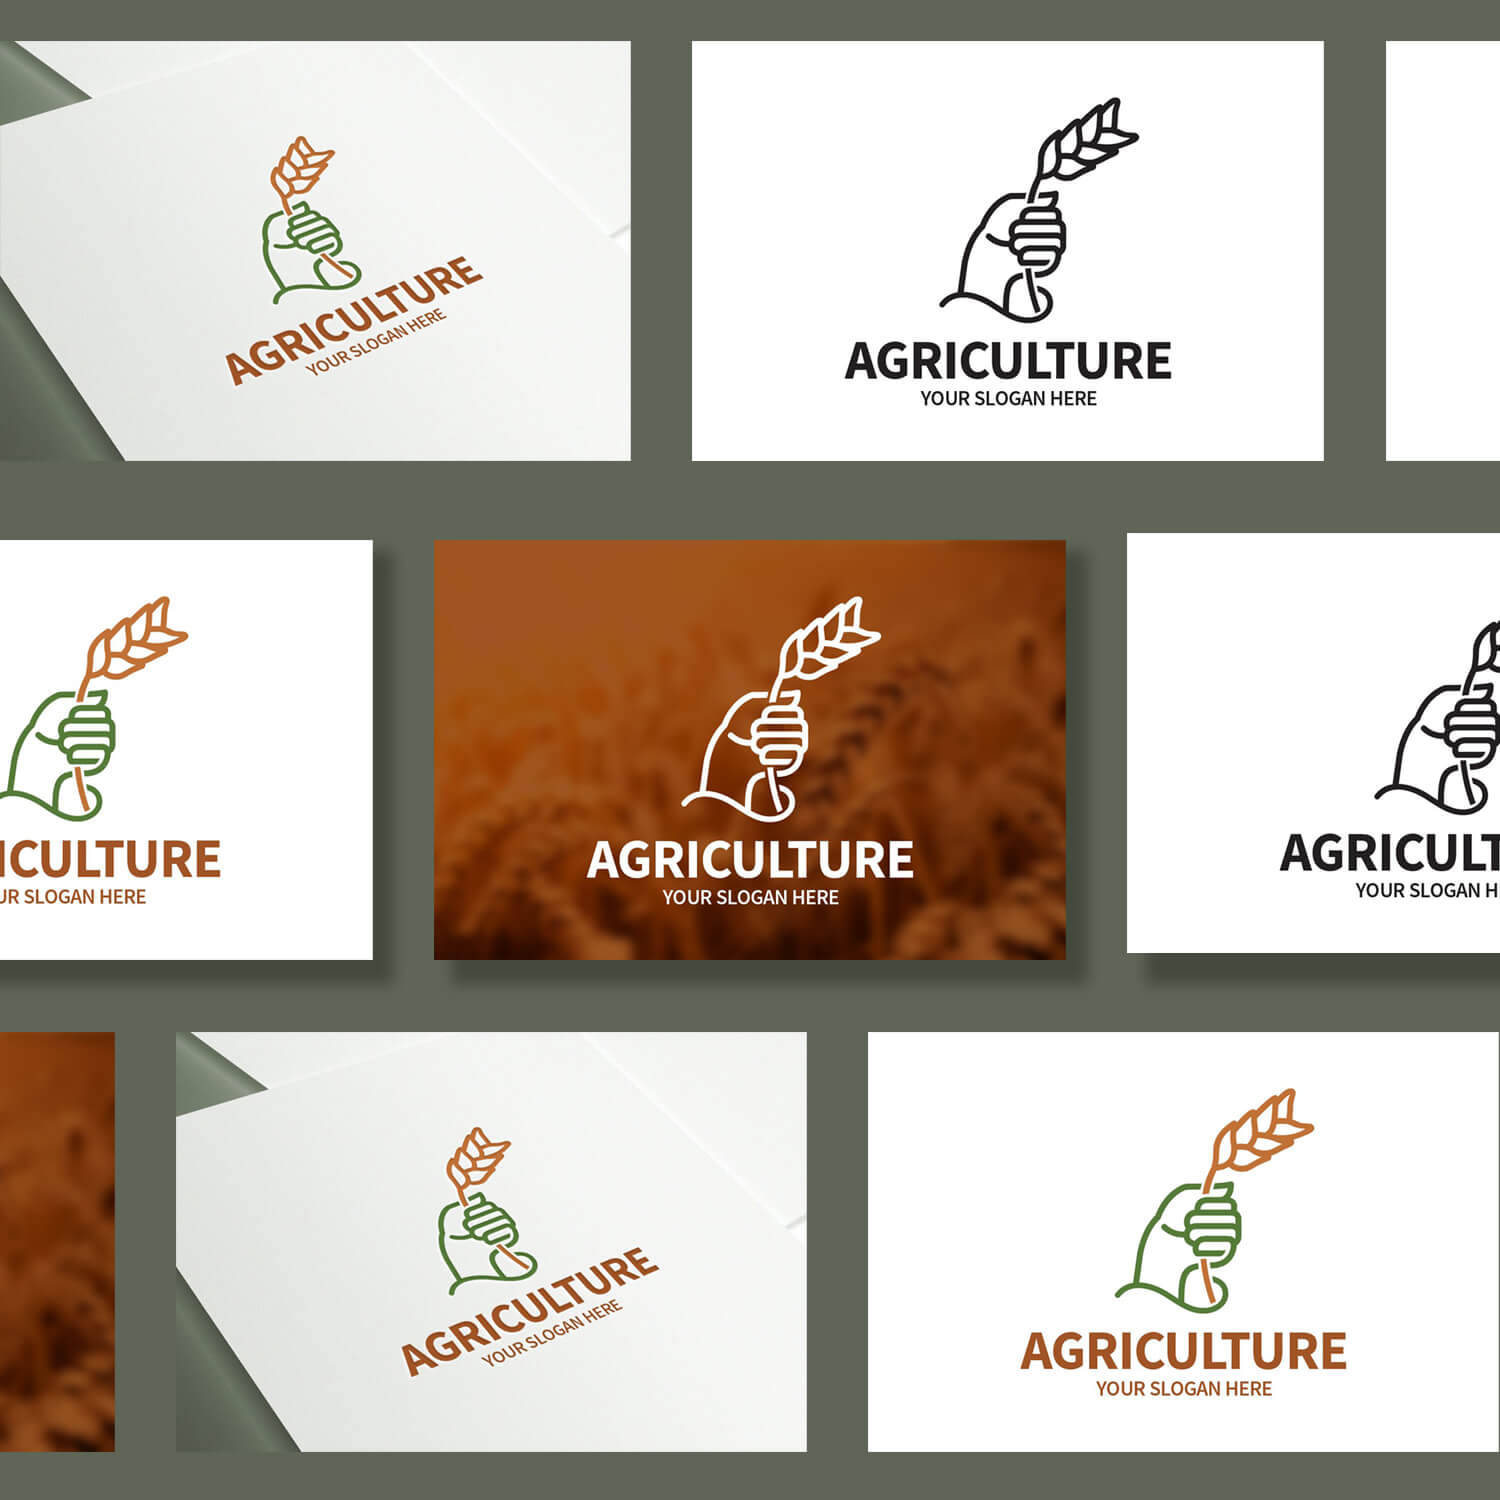 Lots of small agricultural logos.